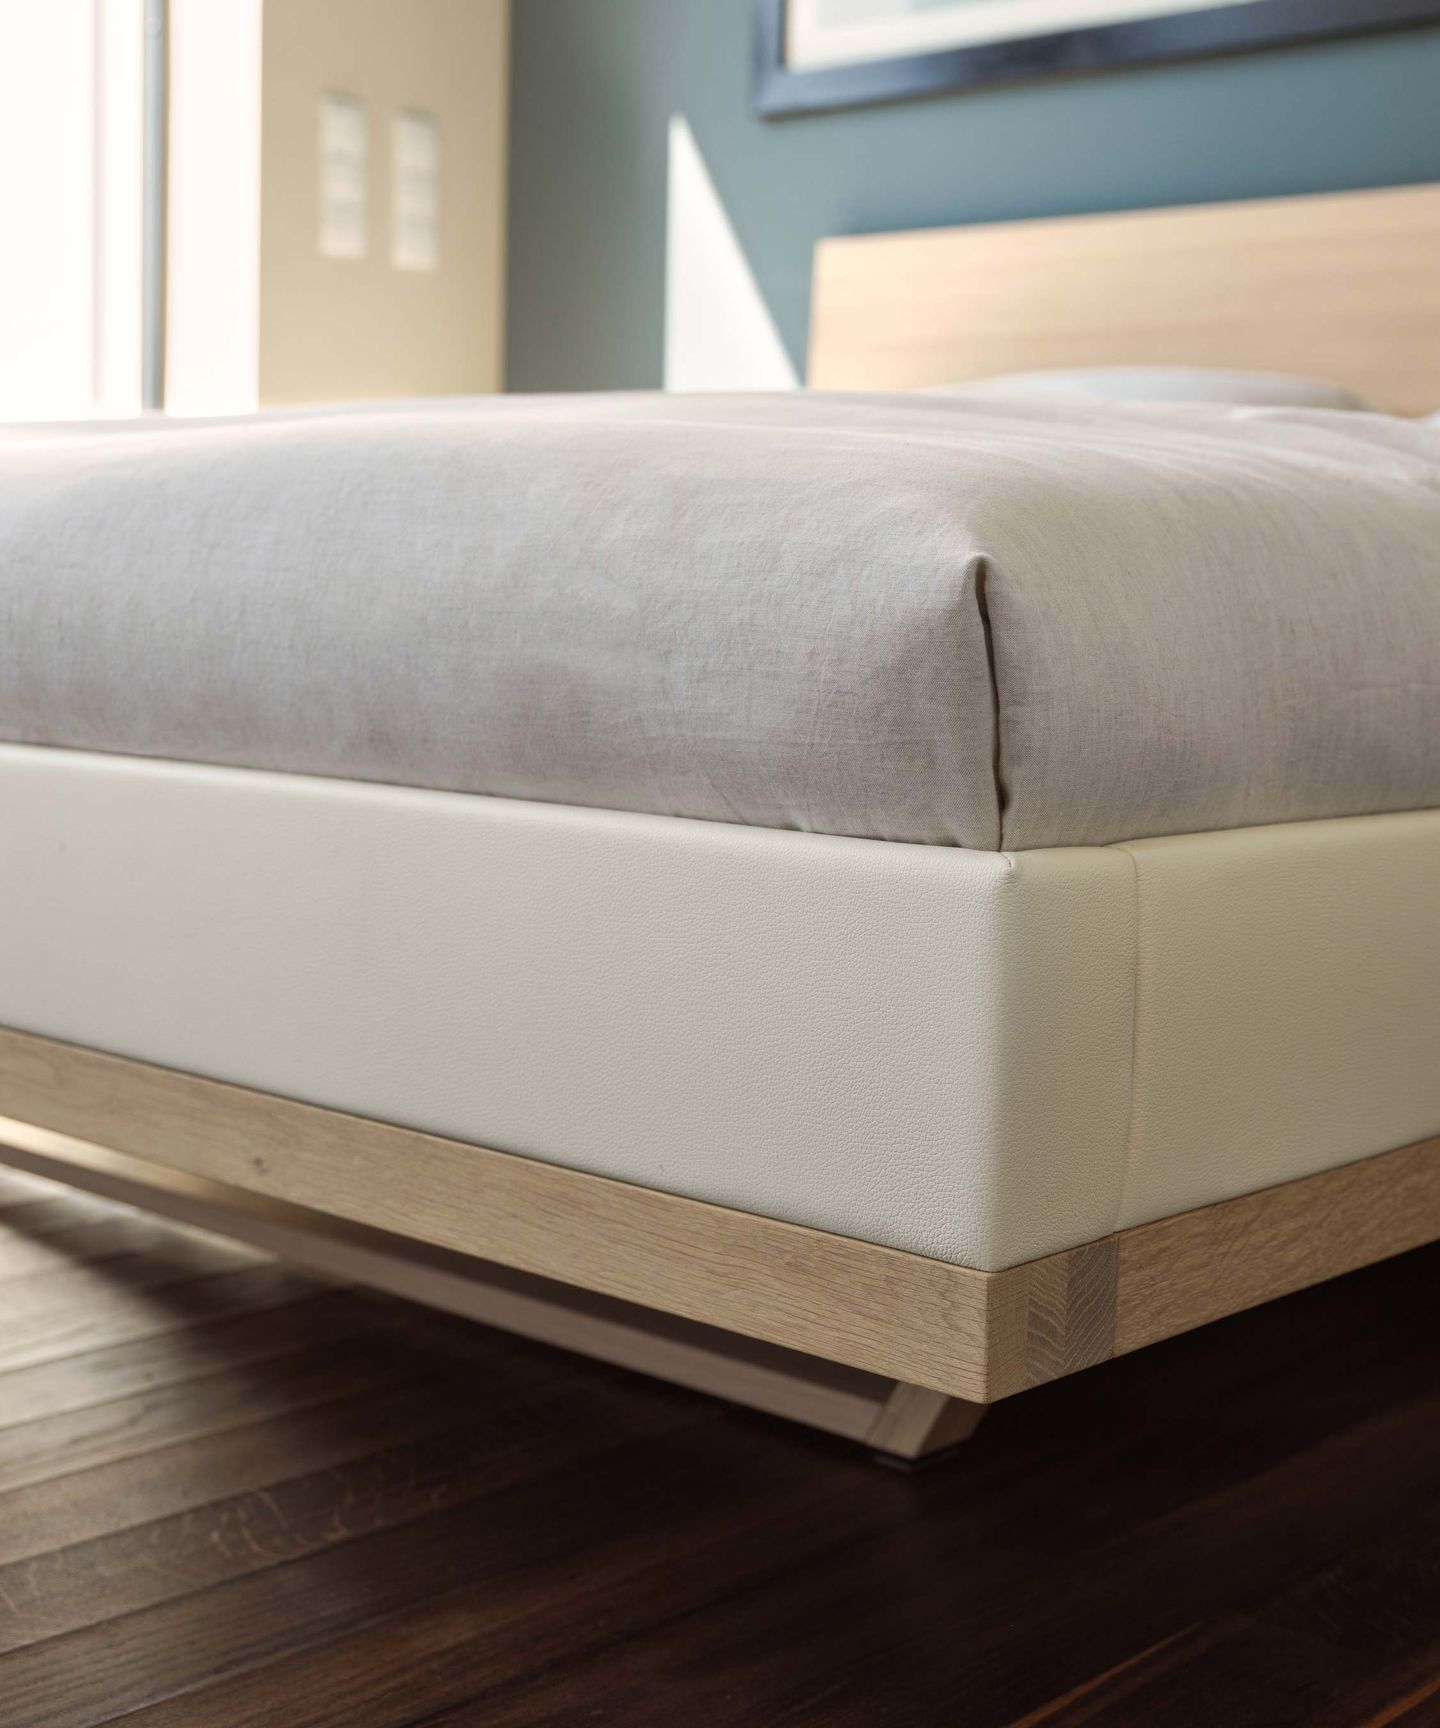 riletto solid wood bed with leather bed sides